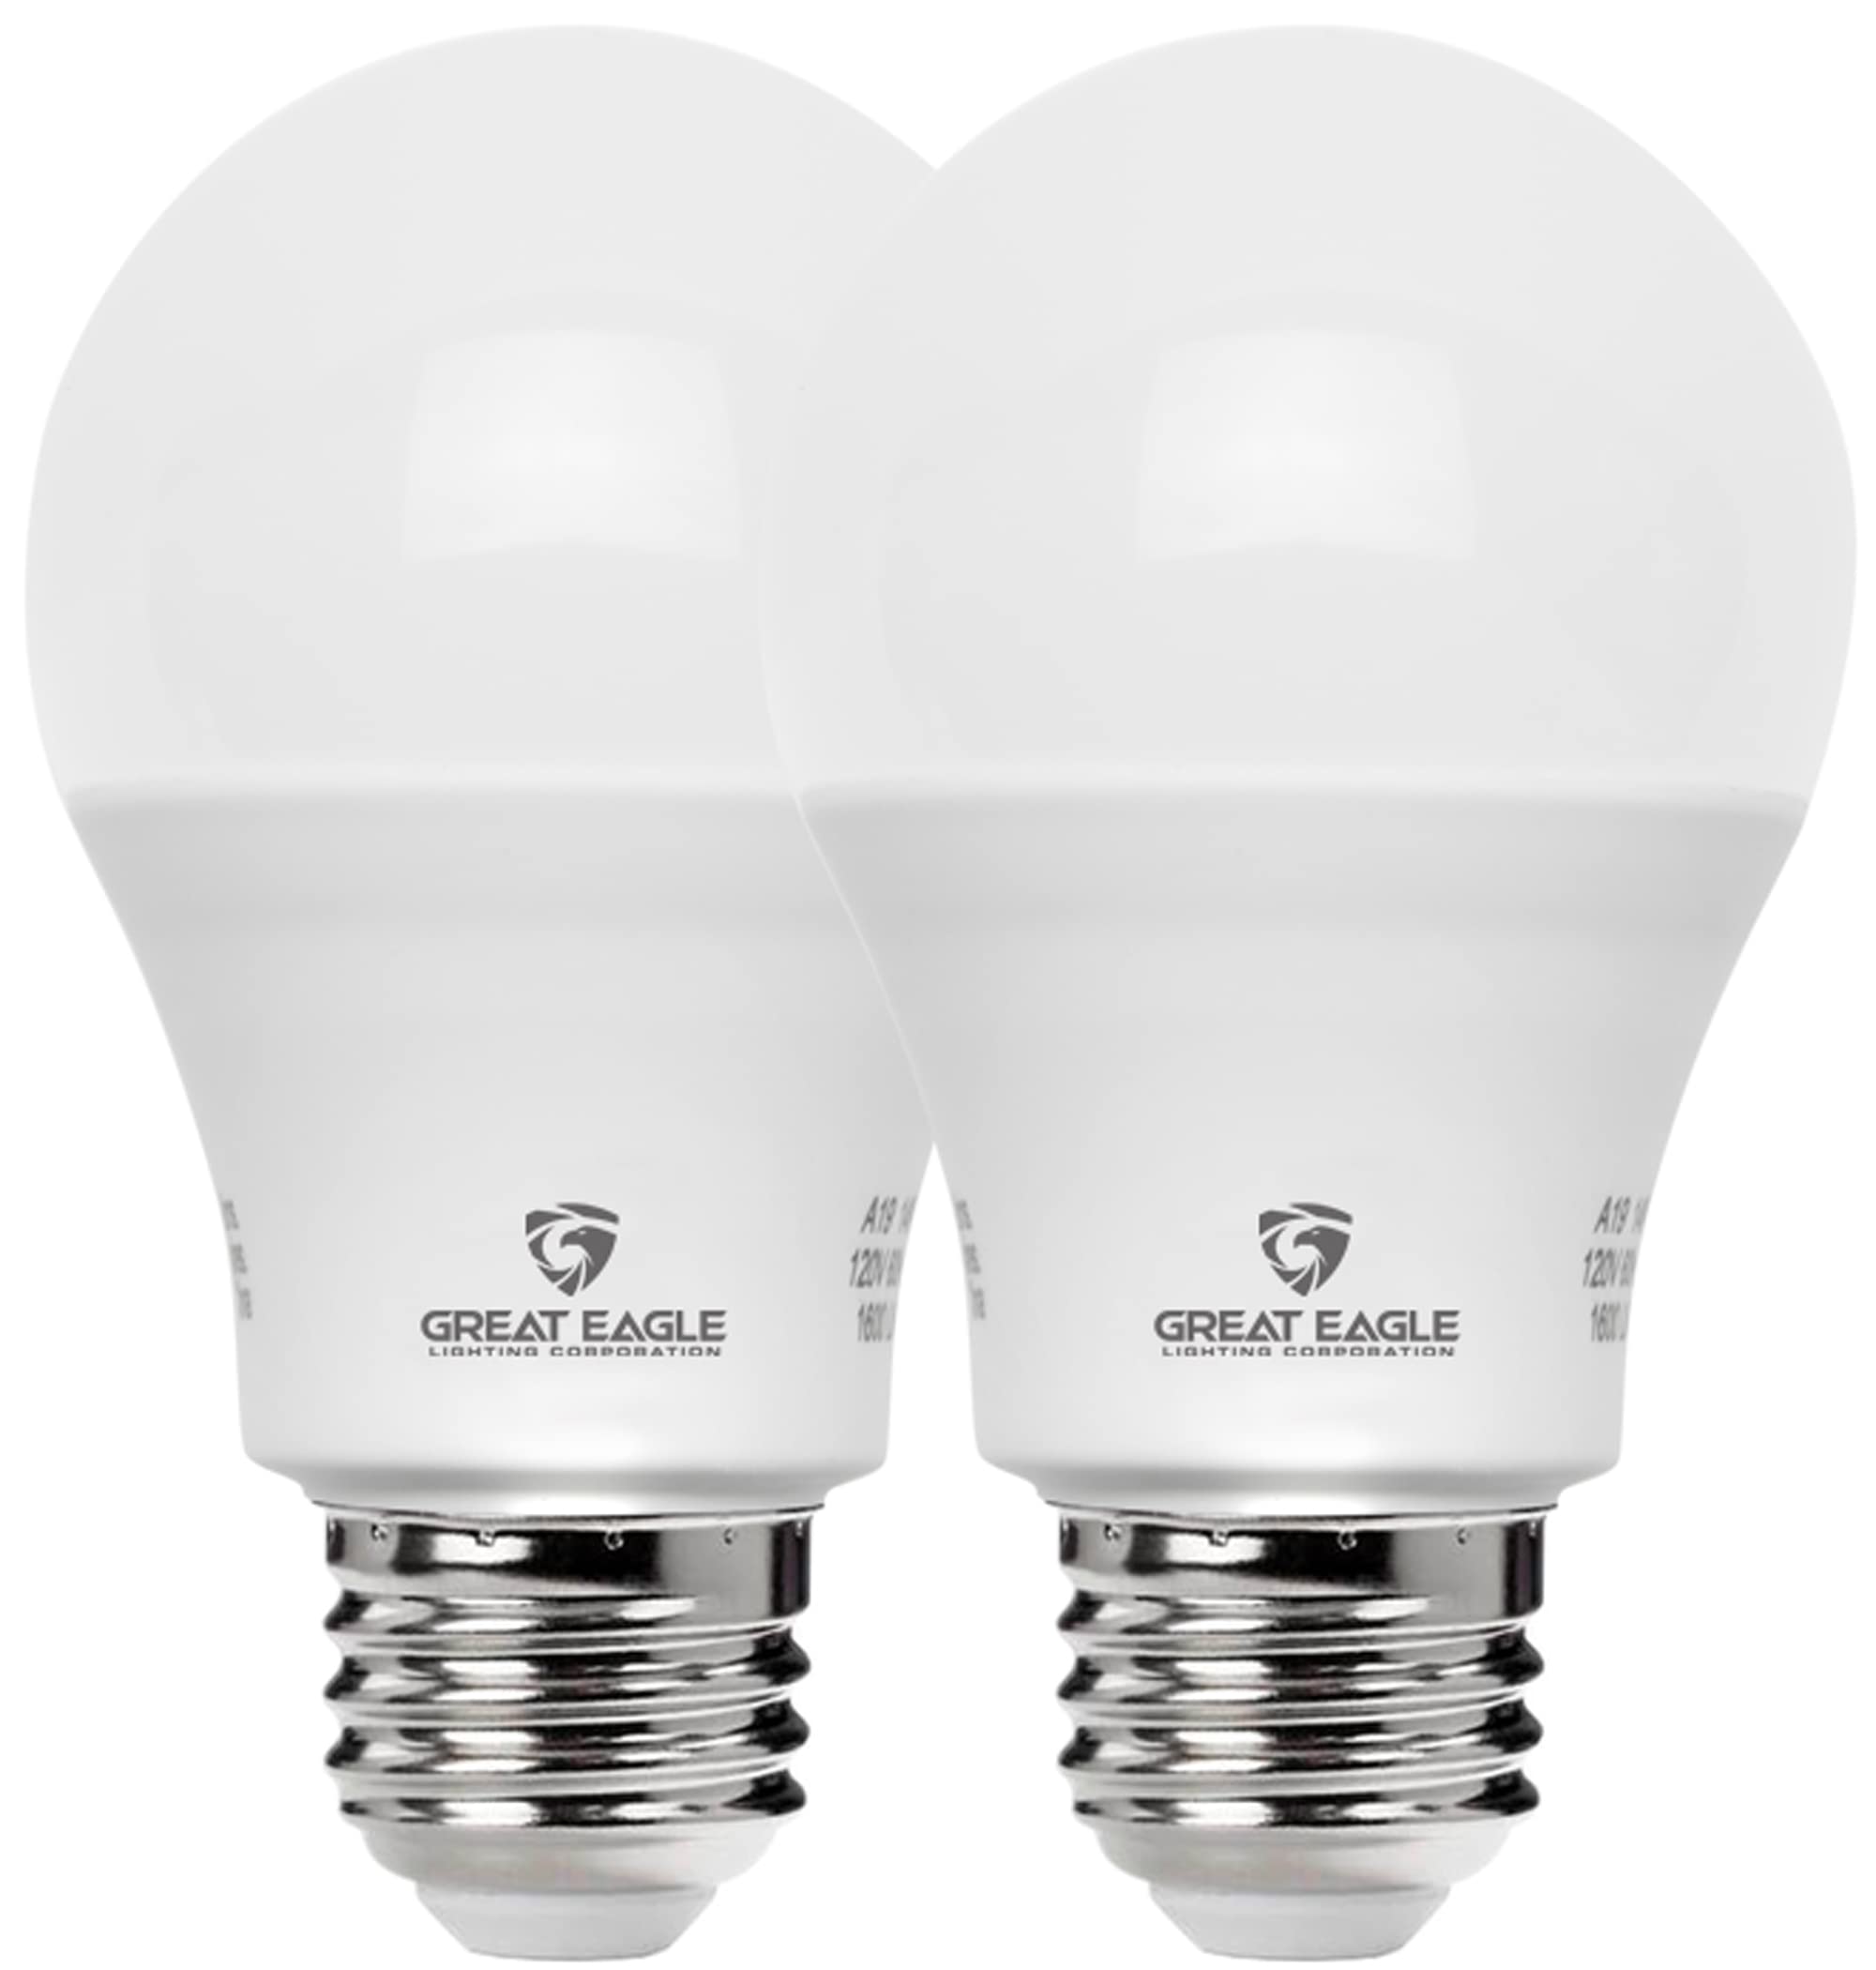 great Eagle Lighting corporation LED A19 Light Bulb 100W Equivalent 1500 Lumens 4000K cool White Non-Dimmable 15-Watt UL Listed 